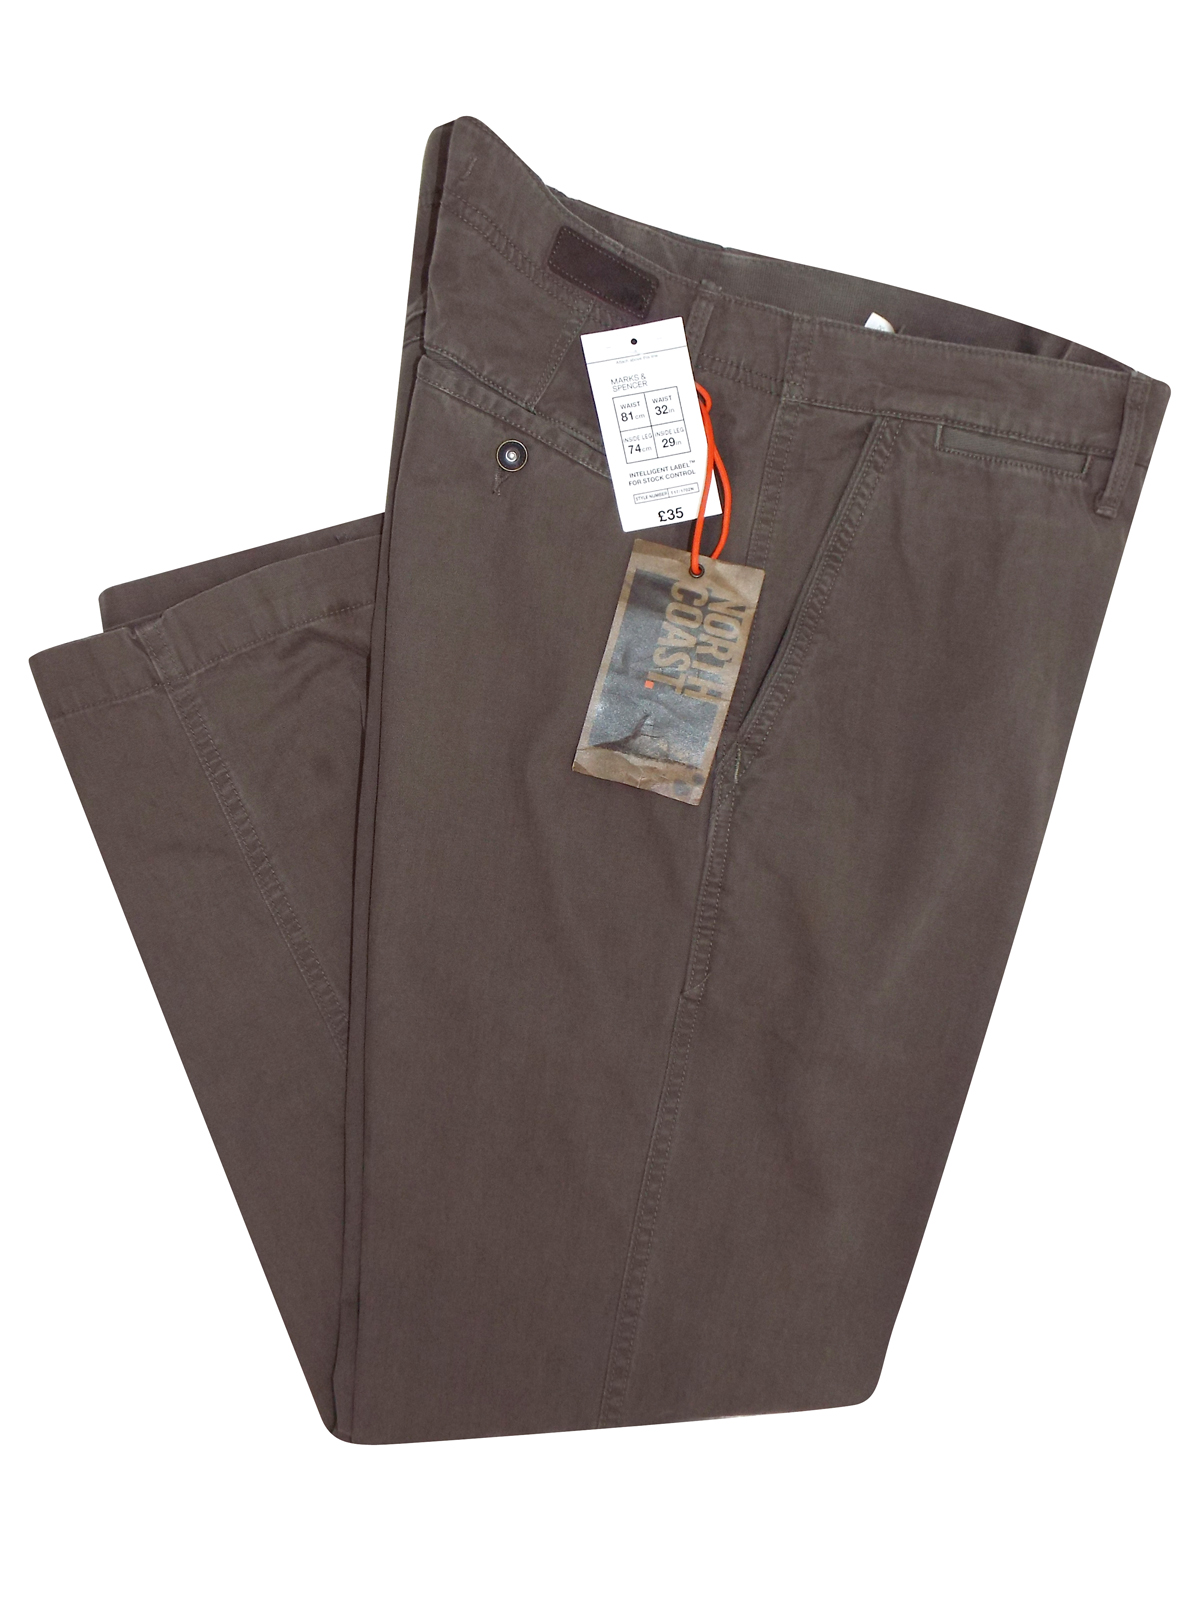 Marks and Spencer - - M&5 TOBACCO Pure Cotton Straight Leg Trousers ...